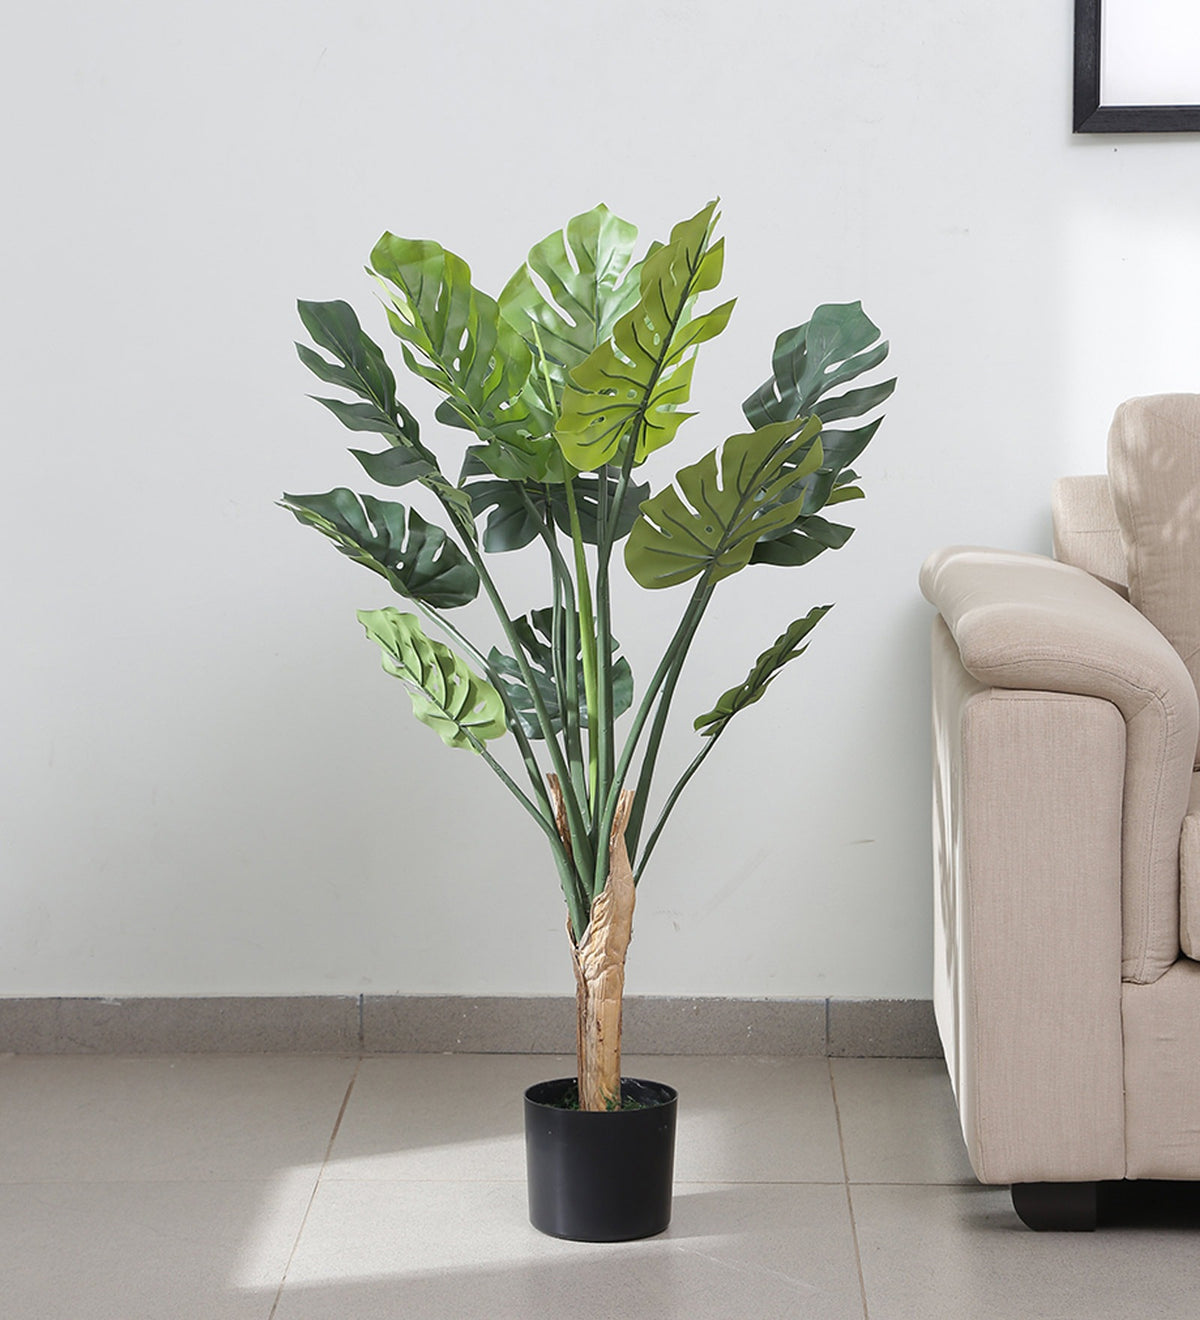 Beautiful Artificial Monstera Plant With Pot for Interior Decor/Home Decor/Office Decor (110 cm Tall, Green)